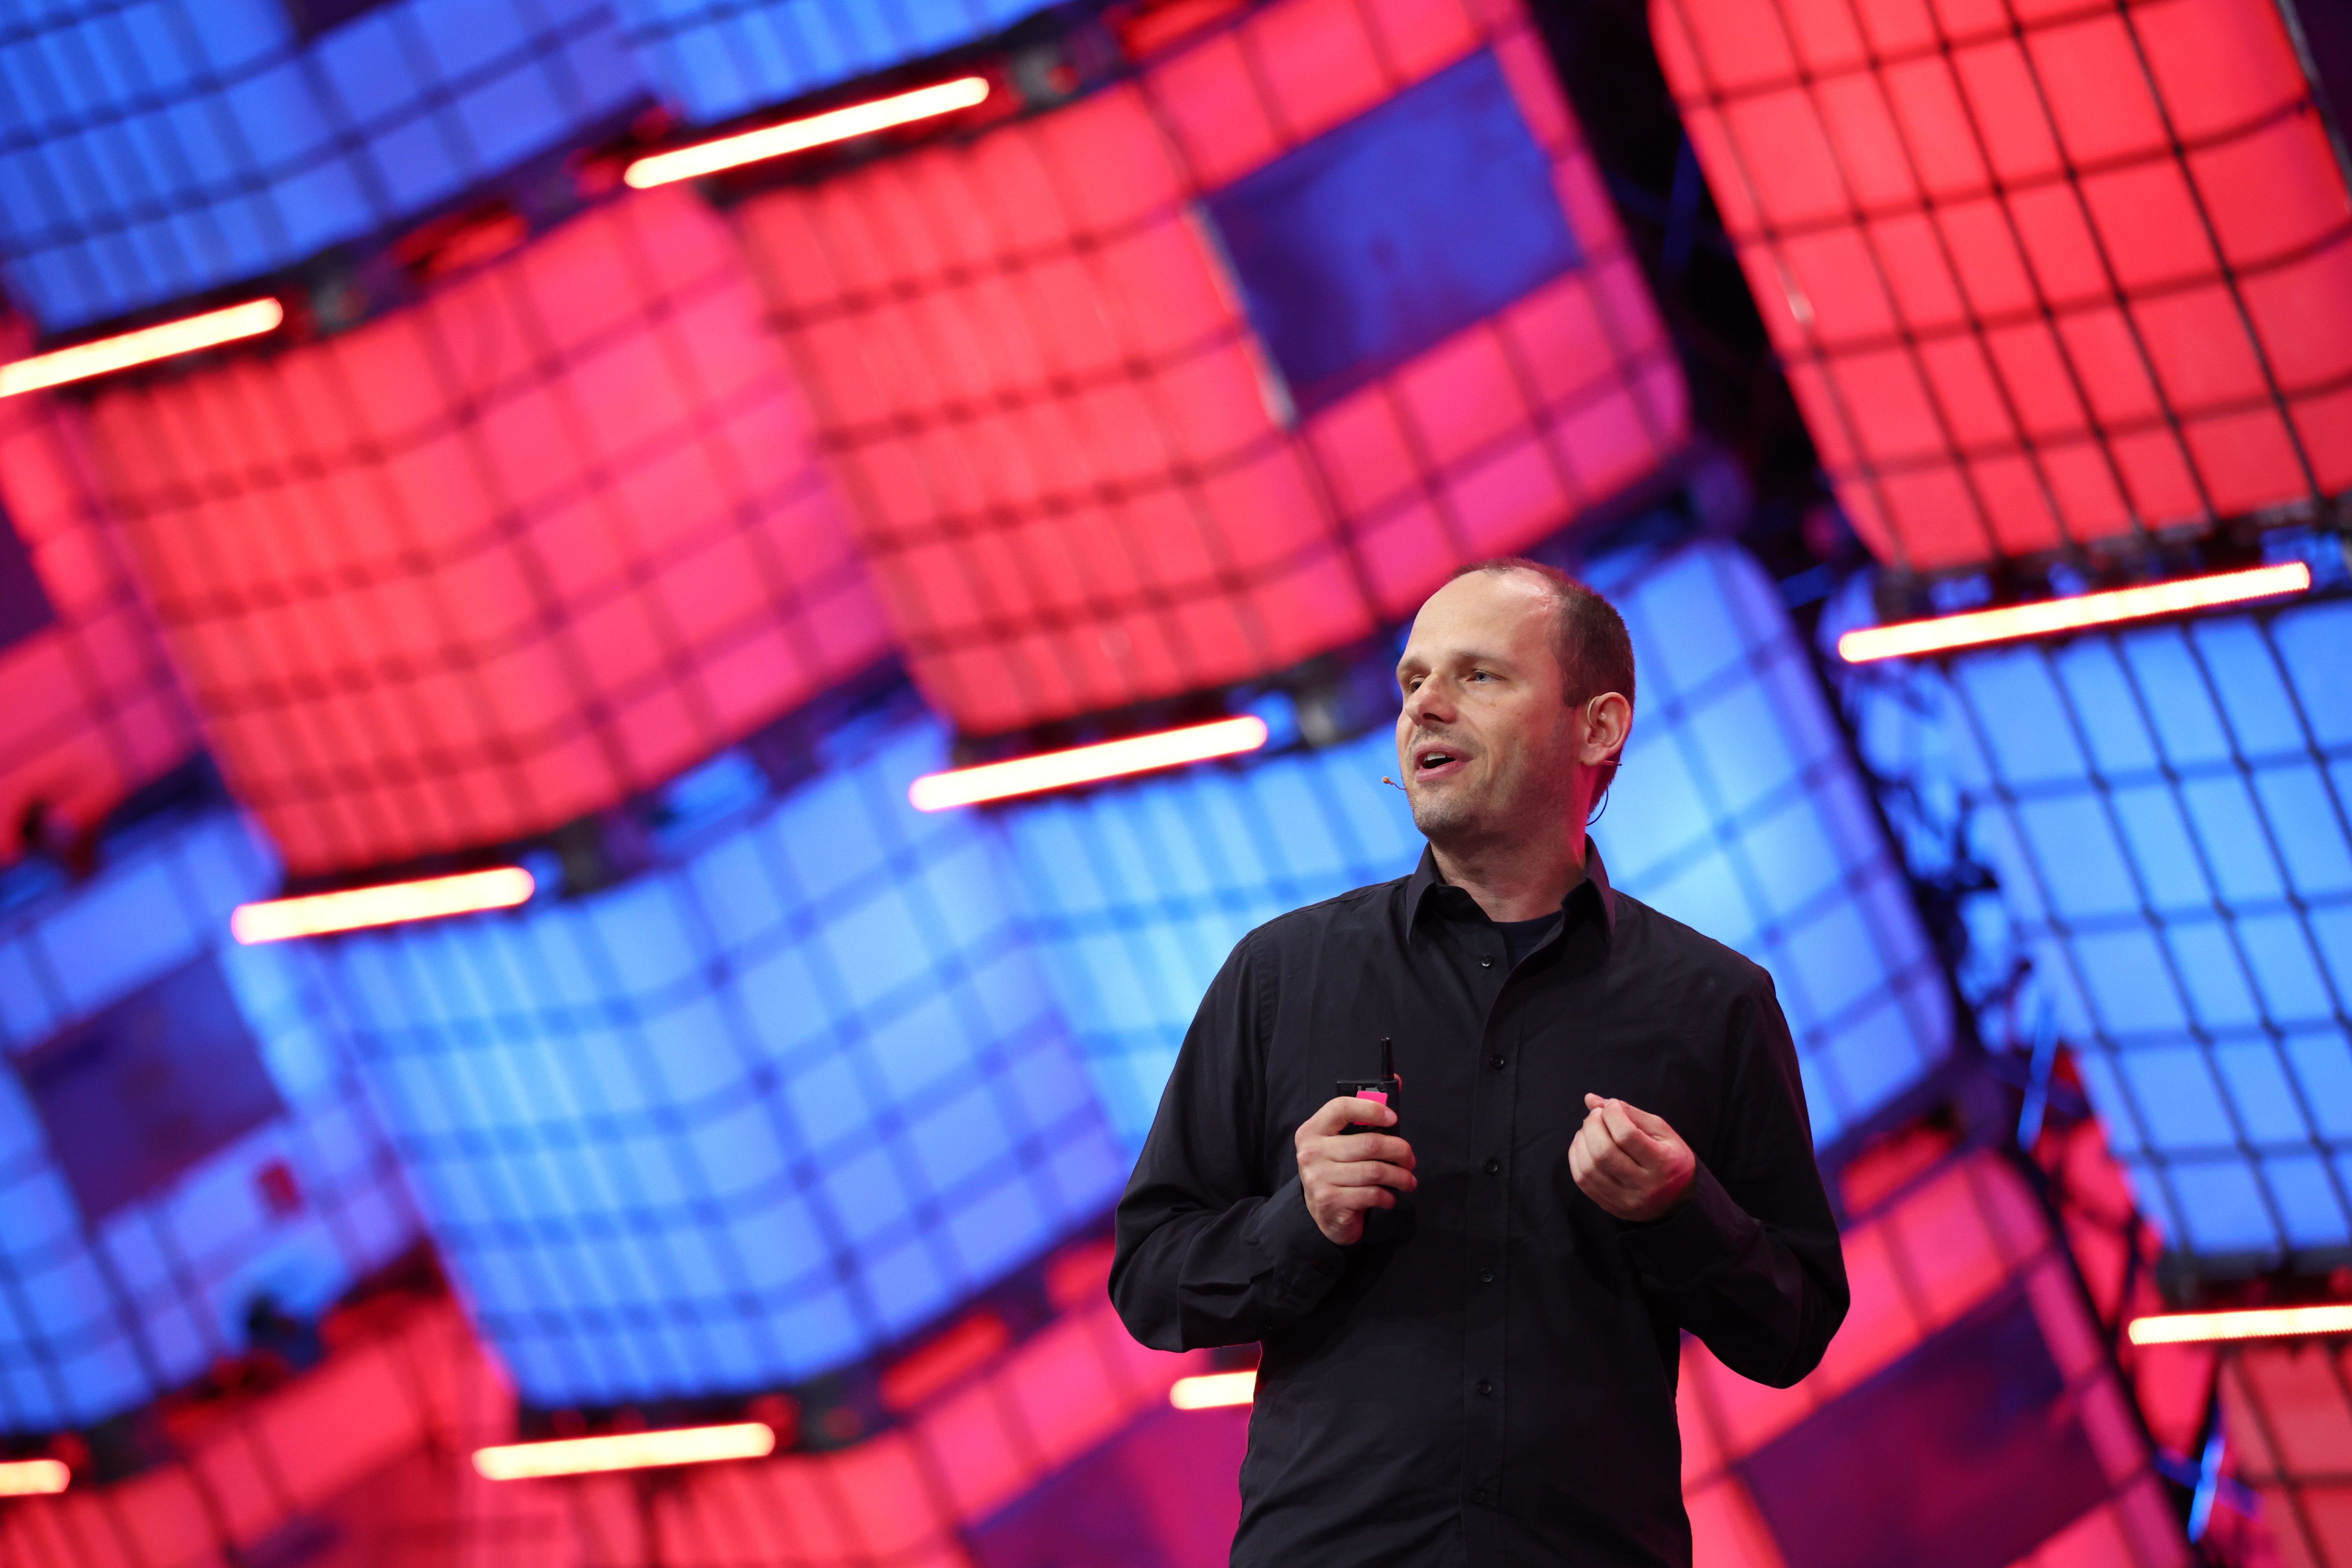 A photograph of a person (Thomas Dohmke, CEO of GitHub) speaking on Centre Stage at Web Summit. The photo is zoomed out, and the person is using their hands to speak. They appear to be speaking to an audience.